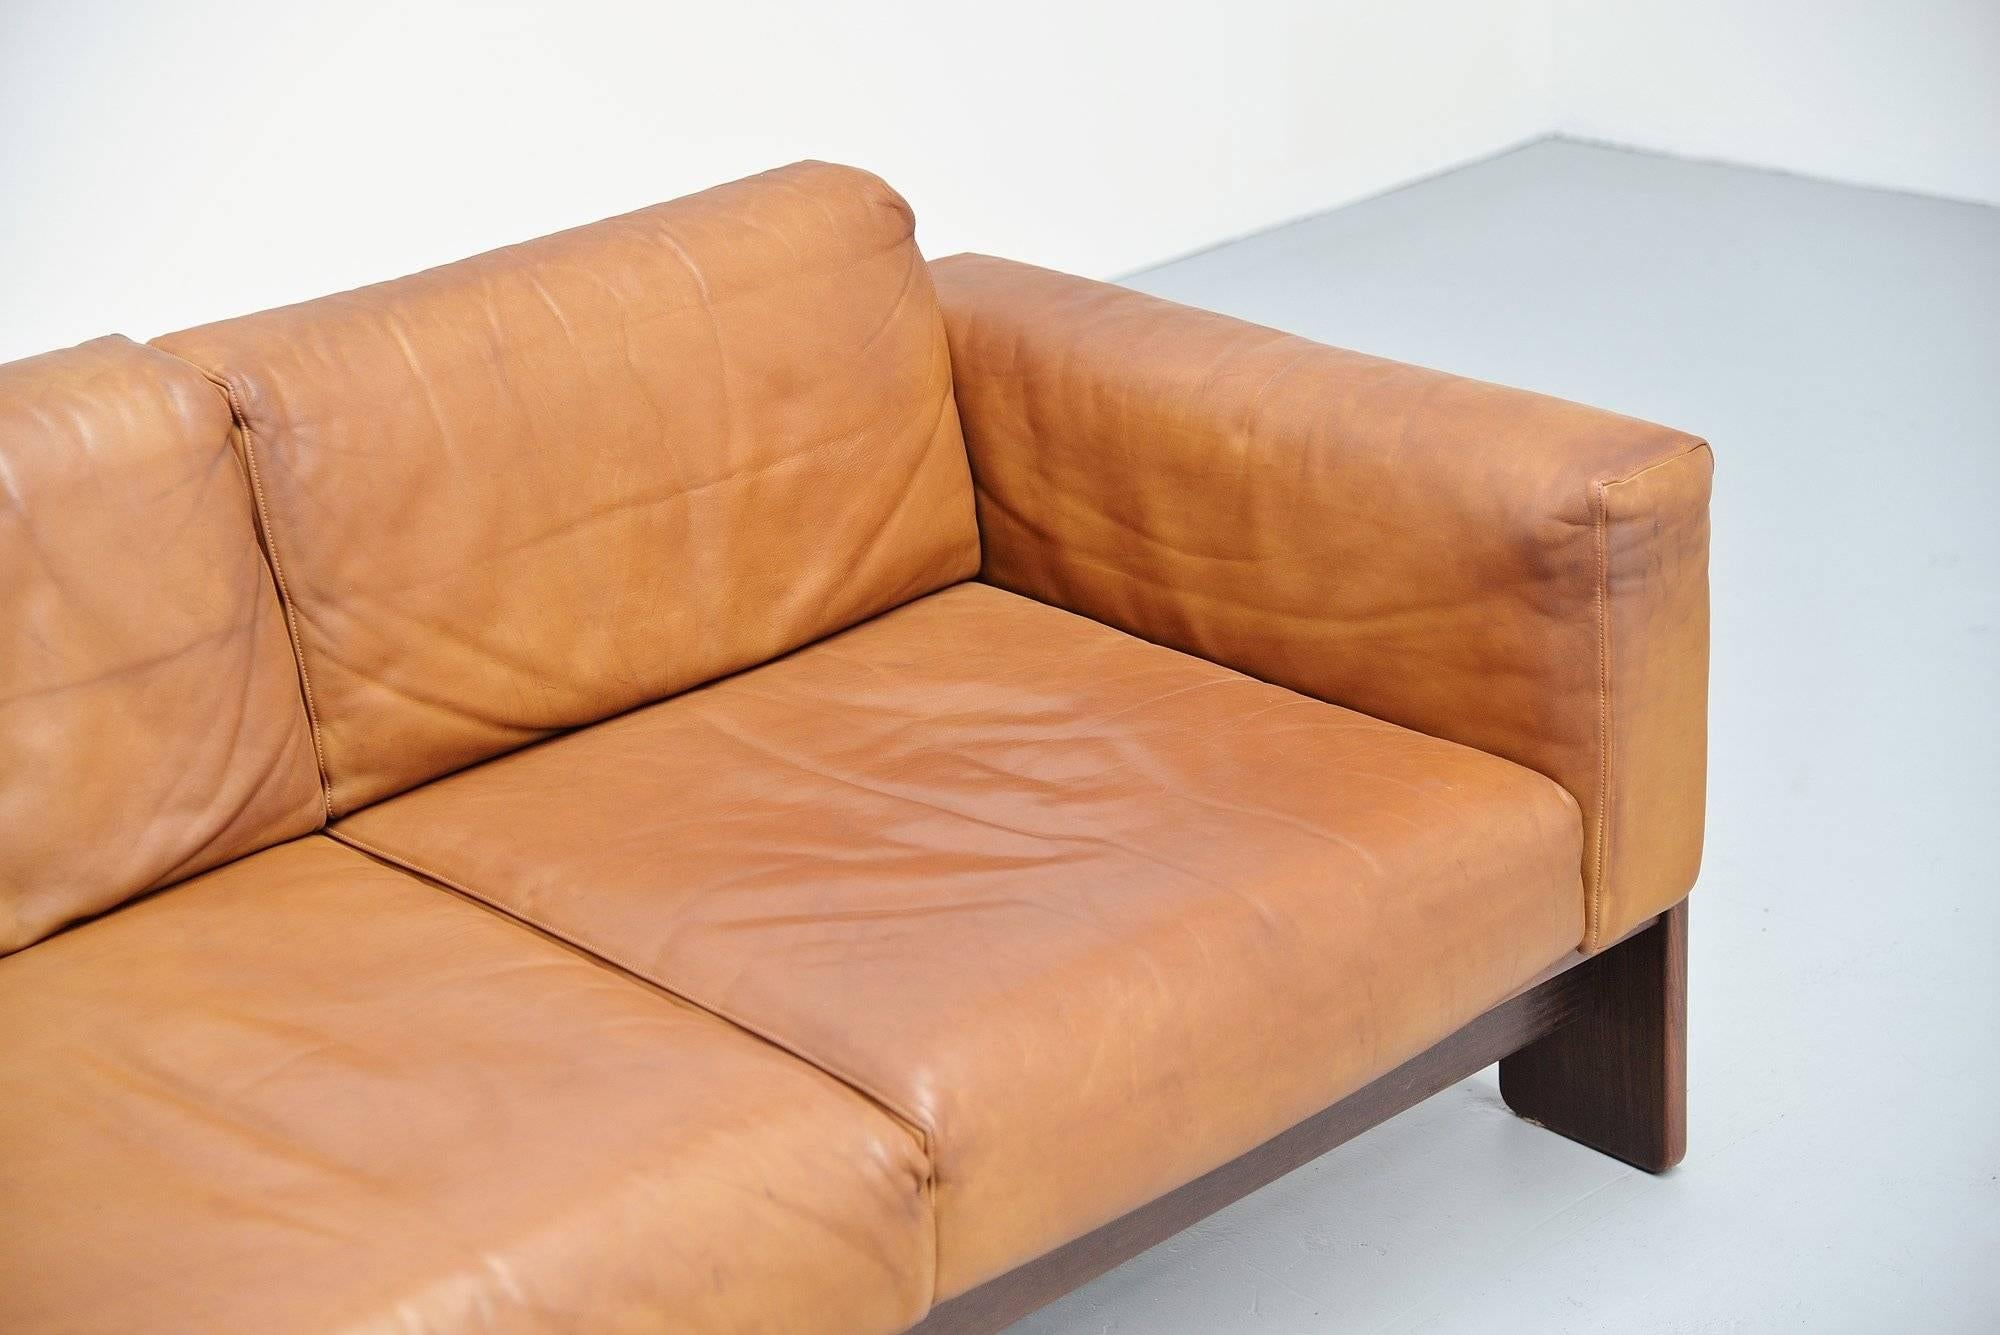 Very nice and comfortable two-seat lounge sofa from the Bastiano series, designed by Afra & Tobia Scarpa for Gavina, Italy, 1968. This sofa has a solid rosewood frame and very nice natural leather cushions. This is for the smallest version available